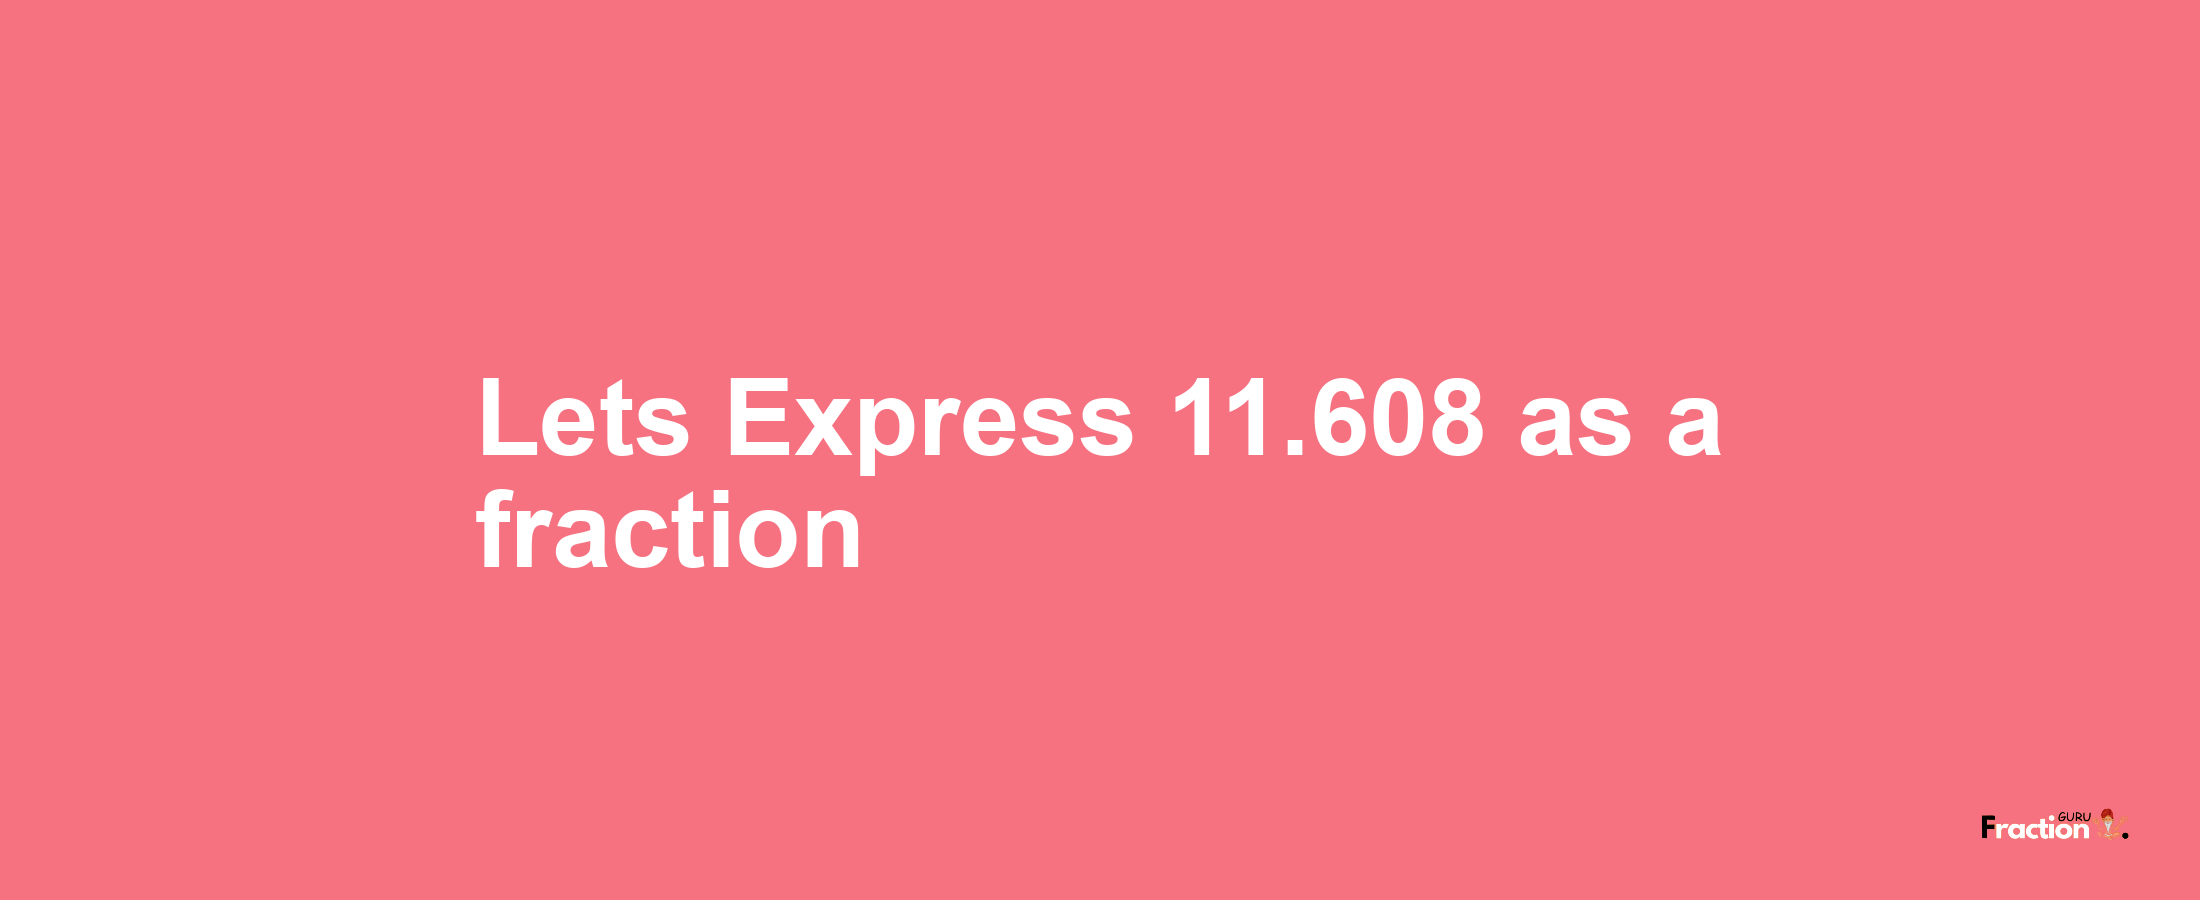 Lets Express 11.608 as afraction